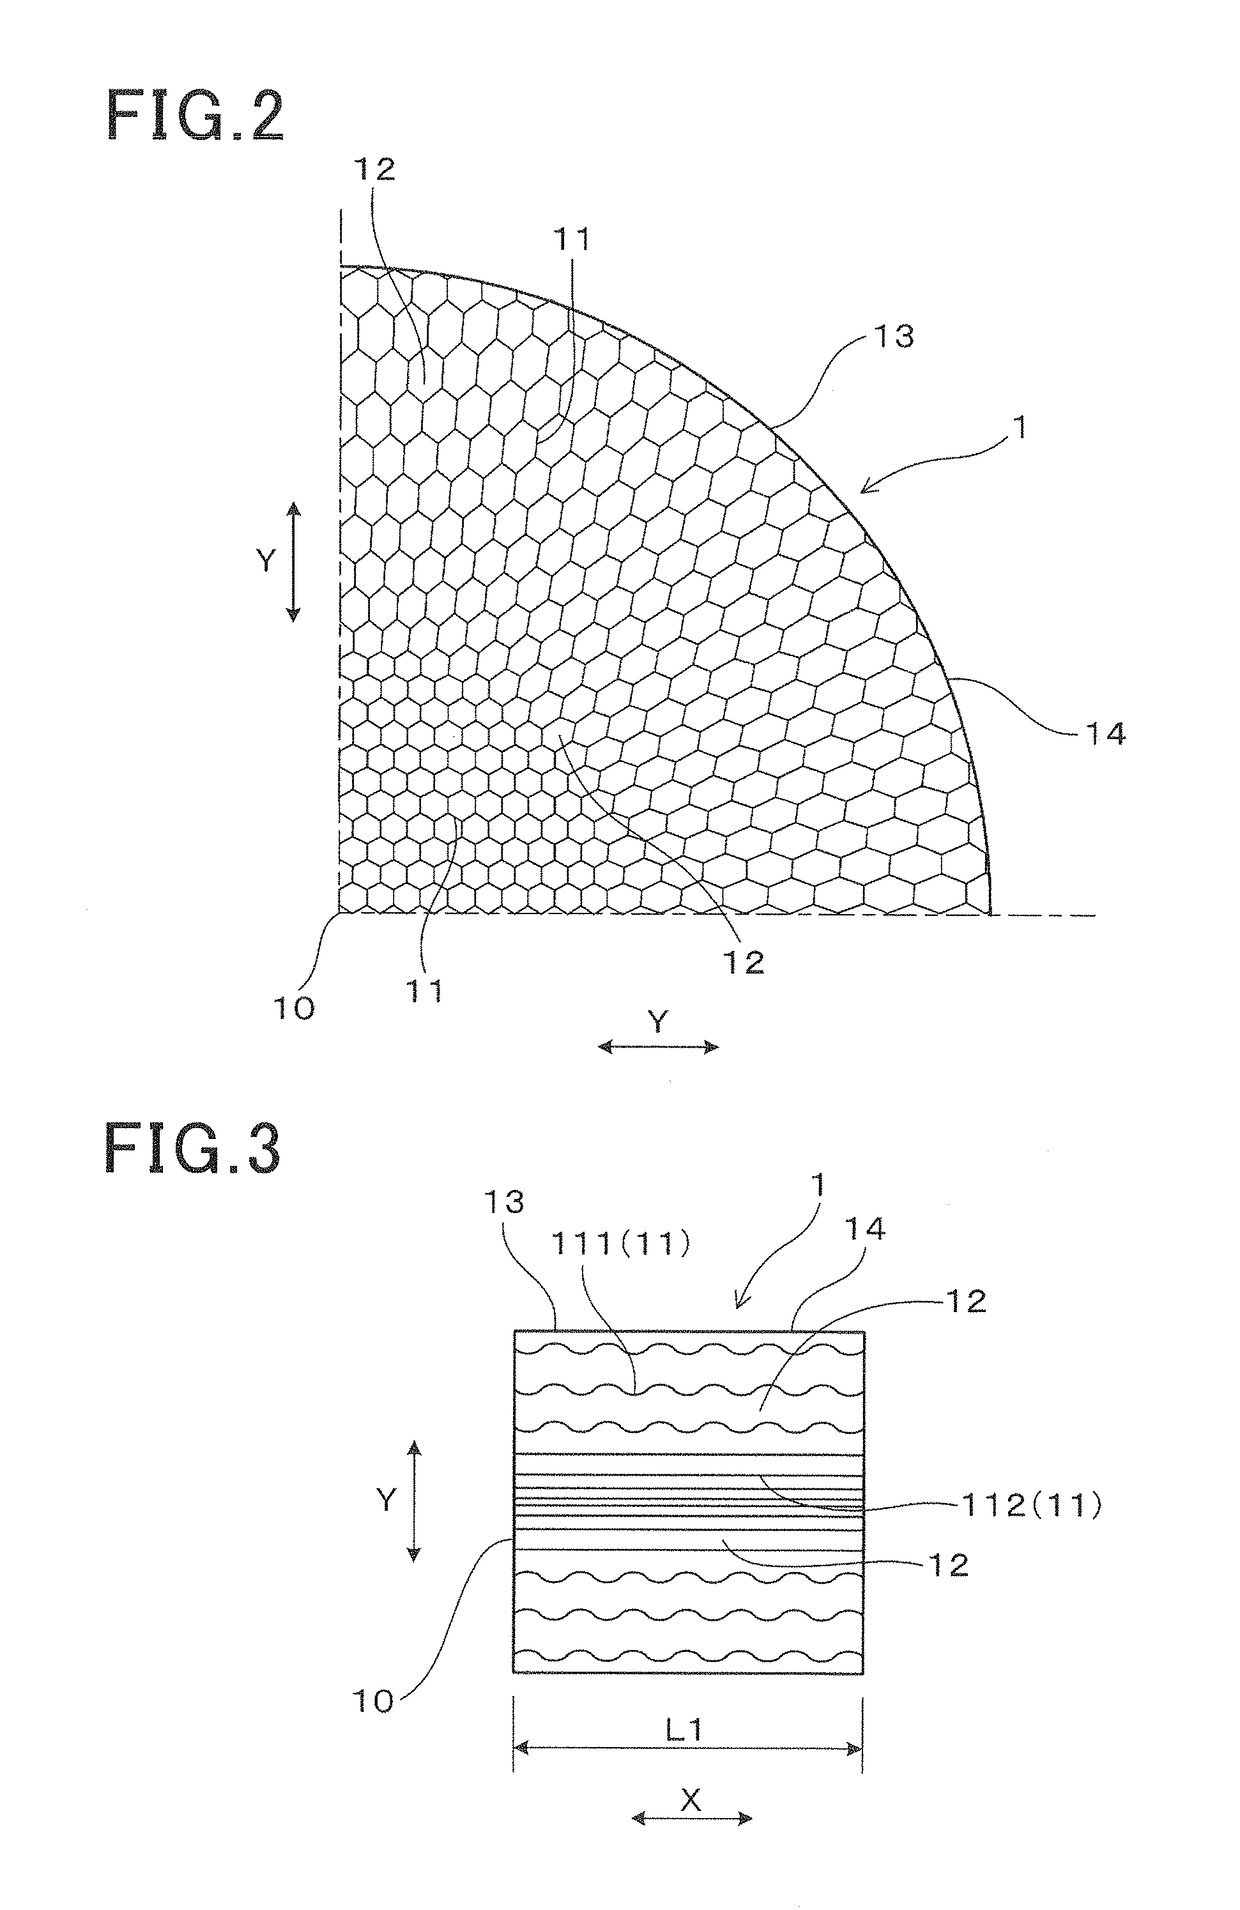 Honeycomb structure body